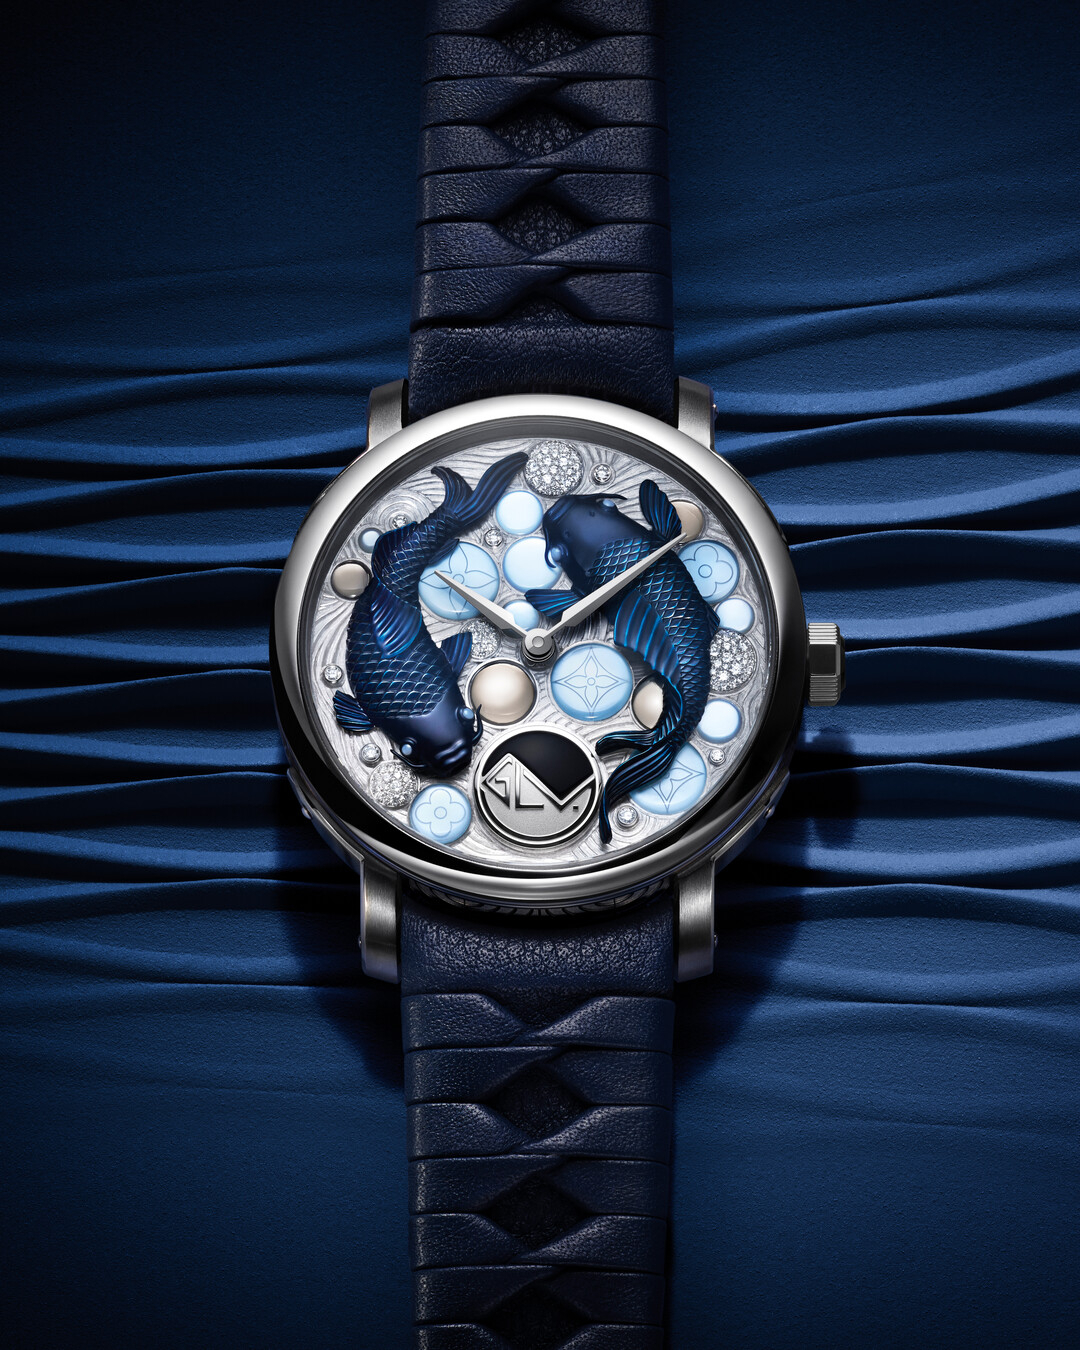 Luxury watch with intricate fish design on face, encased in silver on a textured blue strap